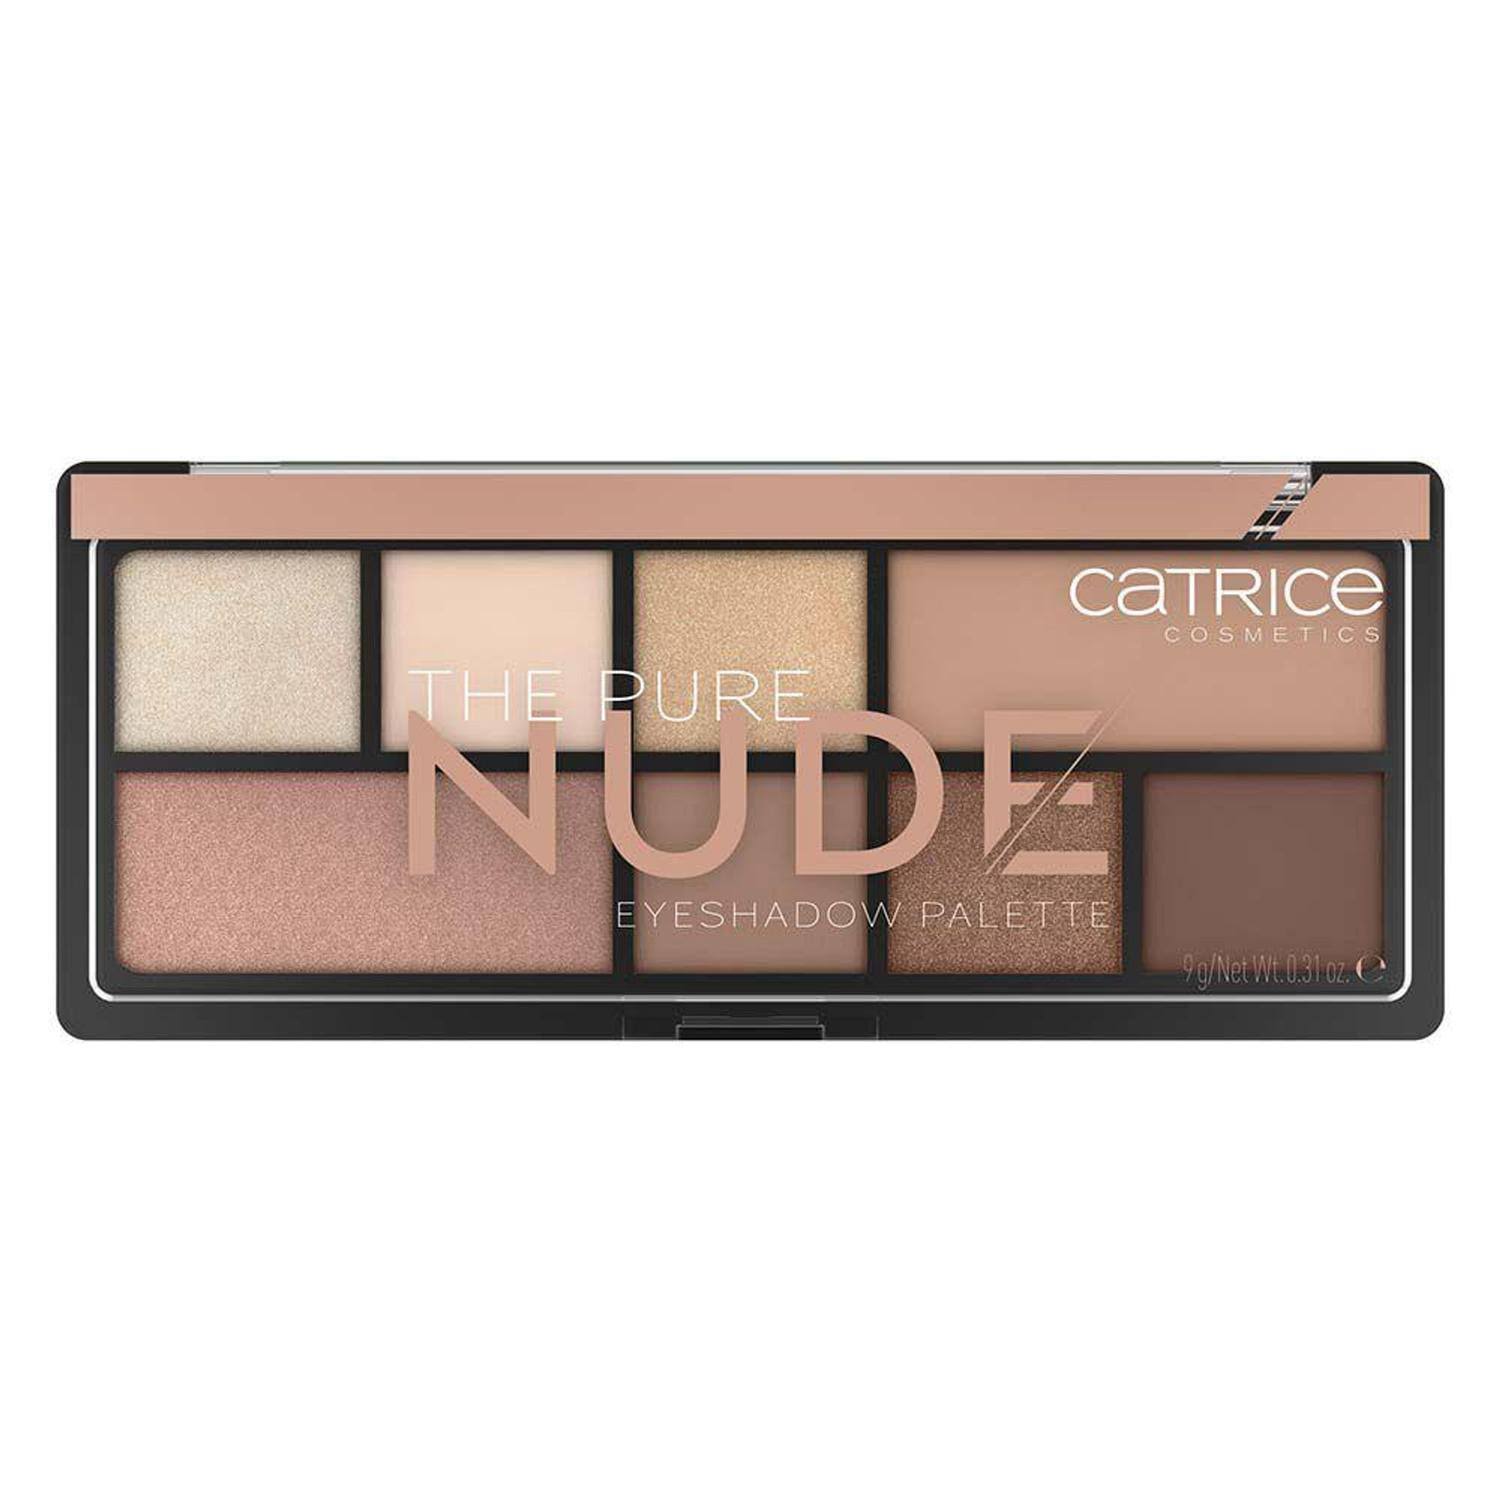 Catrice The Pure Nude Eyeshadow Palette 9 G